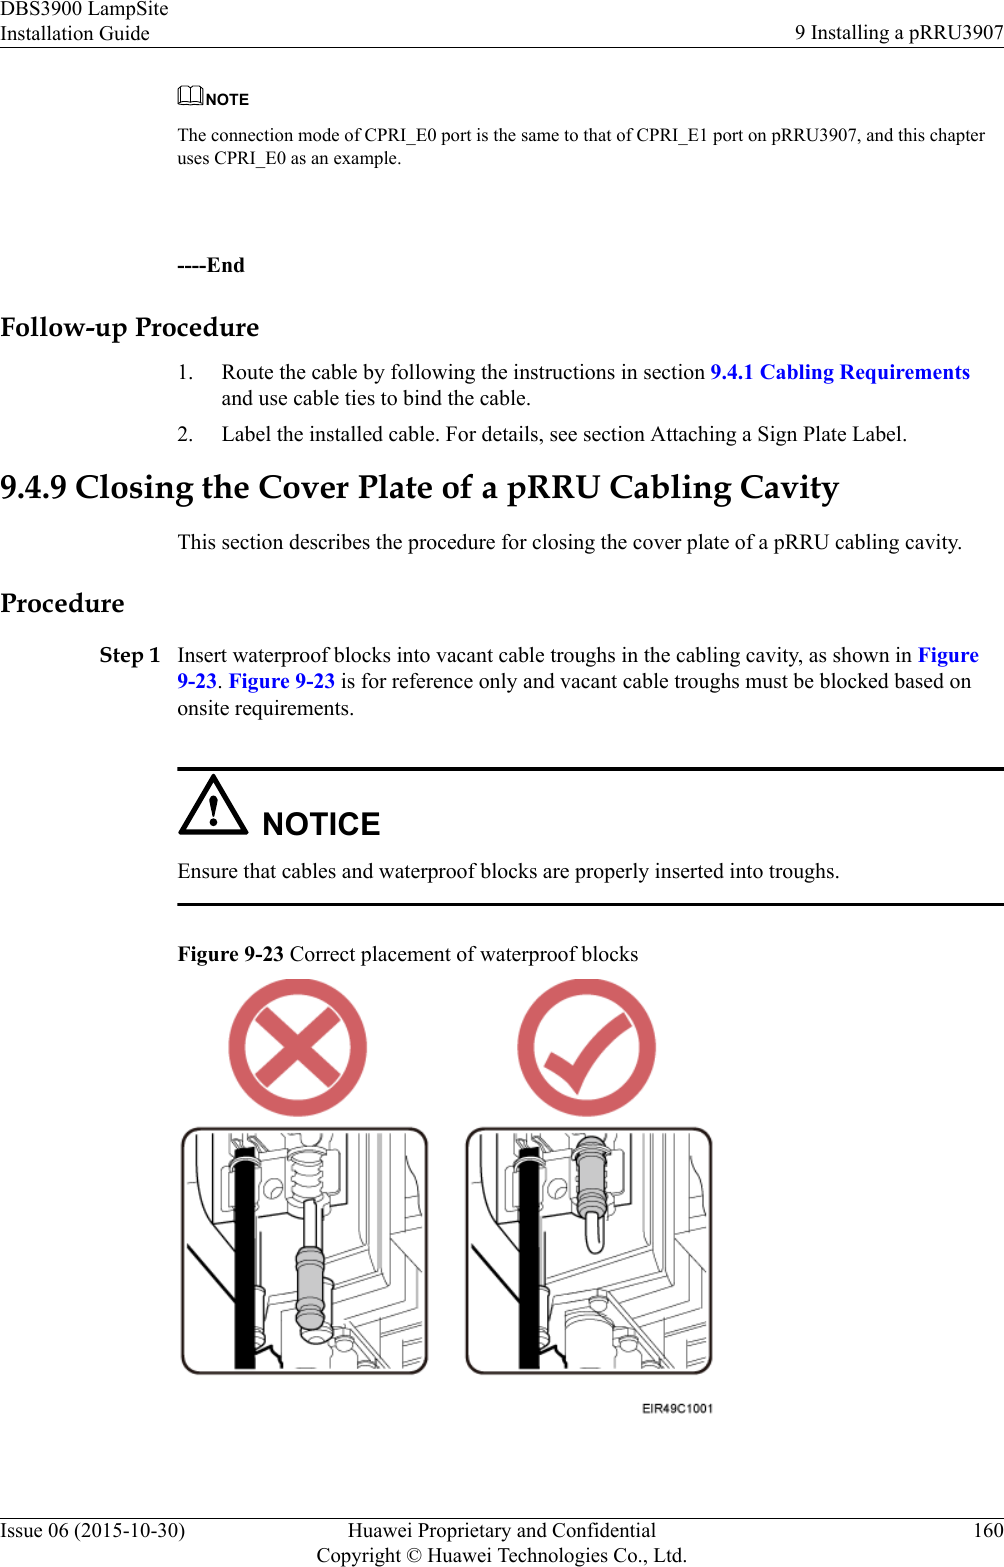 NOTEThe connection mode of CPRI_E0 port is the same to that of CPRI_E1 port on pRRU3907, and this chapteruses CPRI_E0 as an example. ----EndFollow-up Procedure1. Route the cable by following the instructions in section 9.4.1 Cabling Requirementsand use cable ties to bind the cable.2. Label the installed cable. For details, see section Attaching a Sign Plate Label.9.4.9 Closing the Cover Plate of a pRRU Cabling CavityThis section describes the procedure for closing the cover plate of a pRRU cabling cavity.ProcedureStep 1 Insert waterproof blocks into vacant cable troughs in the cabling cavity, as shown in Figure9-23. Figure 9-23 is for reference only and vacant cable troughs must be blocked based ononsite requirements.NOTICEEnsure that cables and waterproof blocks are properly inserted into troughs.Figure 9-23 Correct placement of waterproof blocks DBS3900 LampSiteInstallation Guide 9 Installing a pRRU3907Issue 06 (2015-10-30) Huawei Proprietary and ConfidentialCopyright © Huawei Technologies Co., Ltd.160